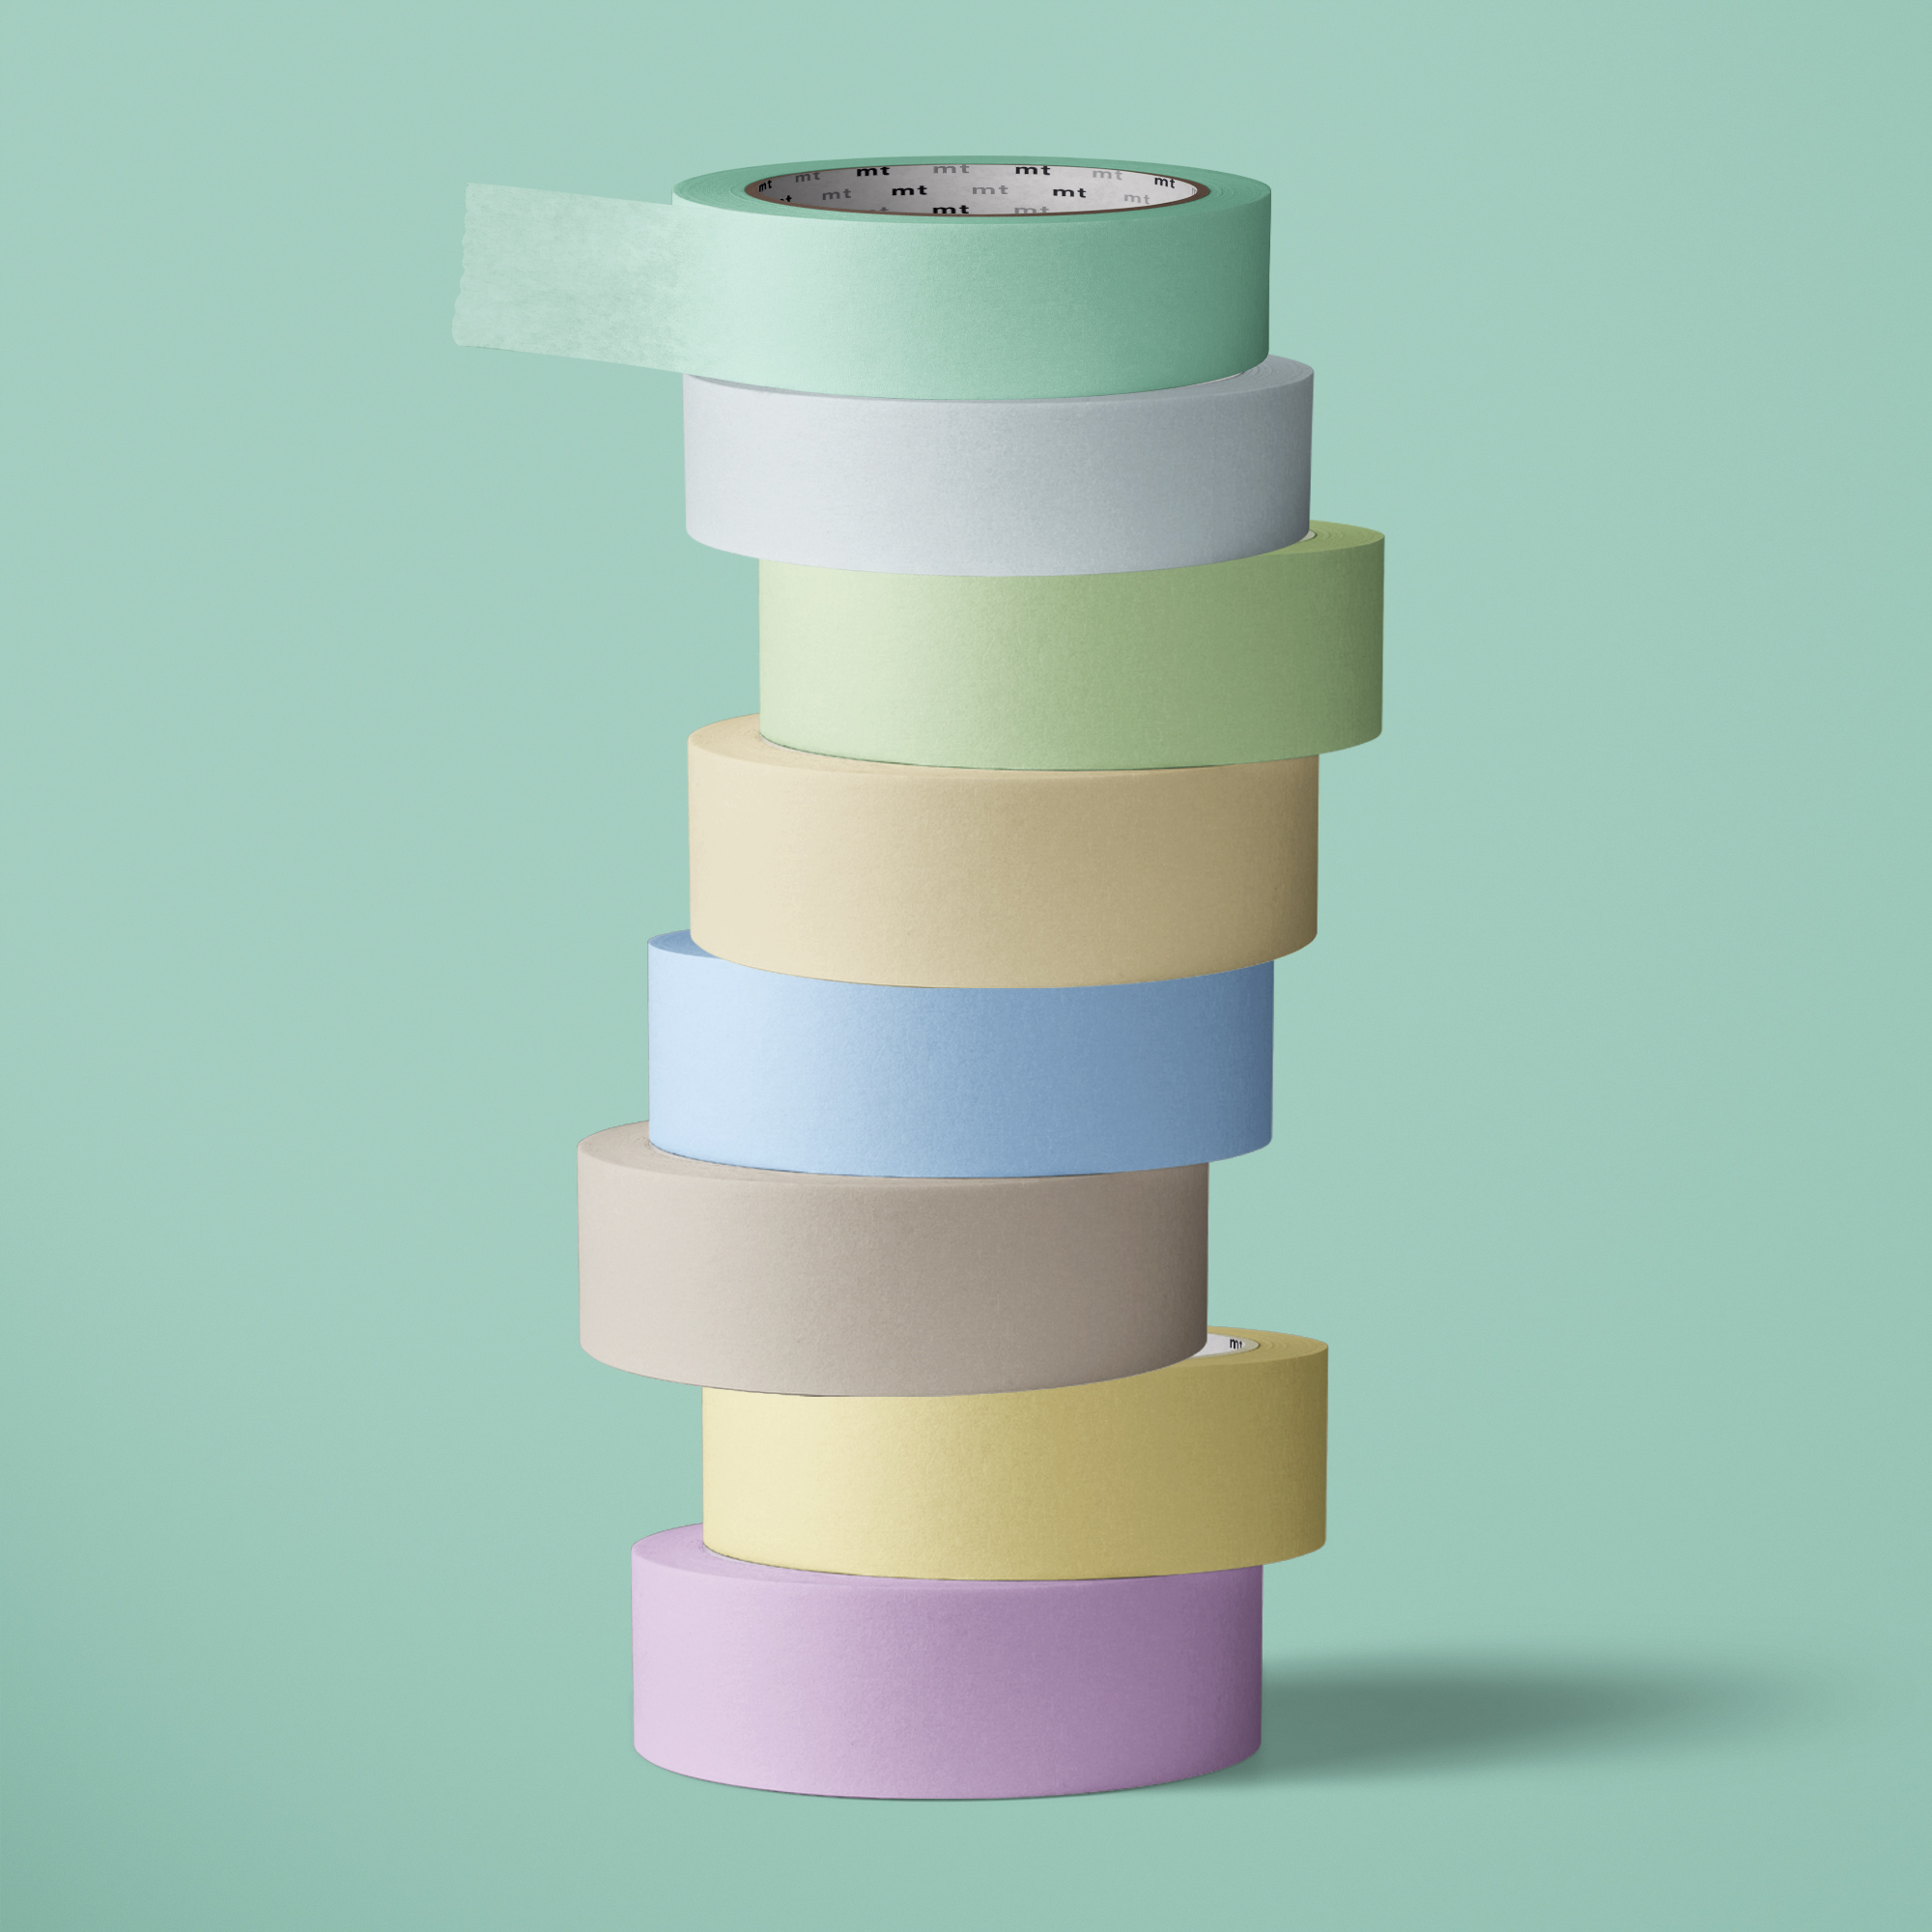 Washi Tape / Masking Tape | Pastel - Japanese decorative tape made from rice paper - Applications: Decorating photo albums, scrap books, gif...